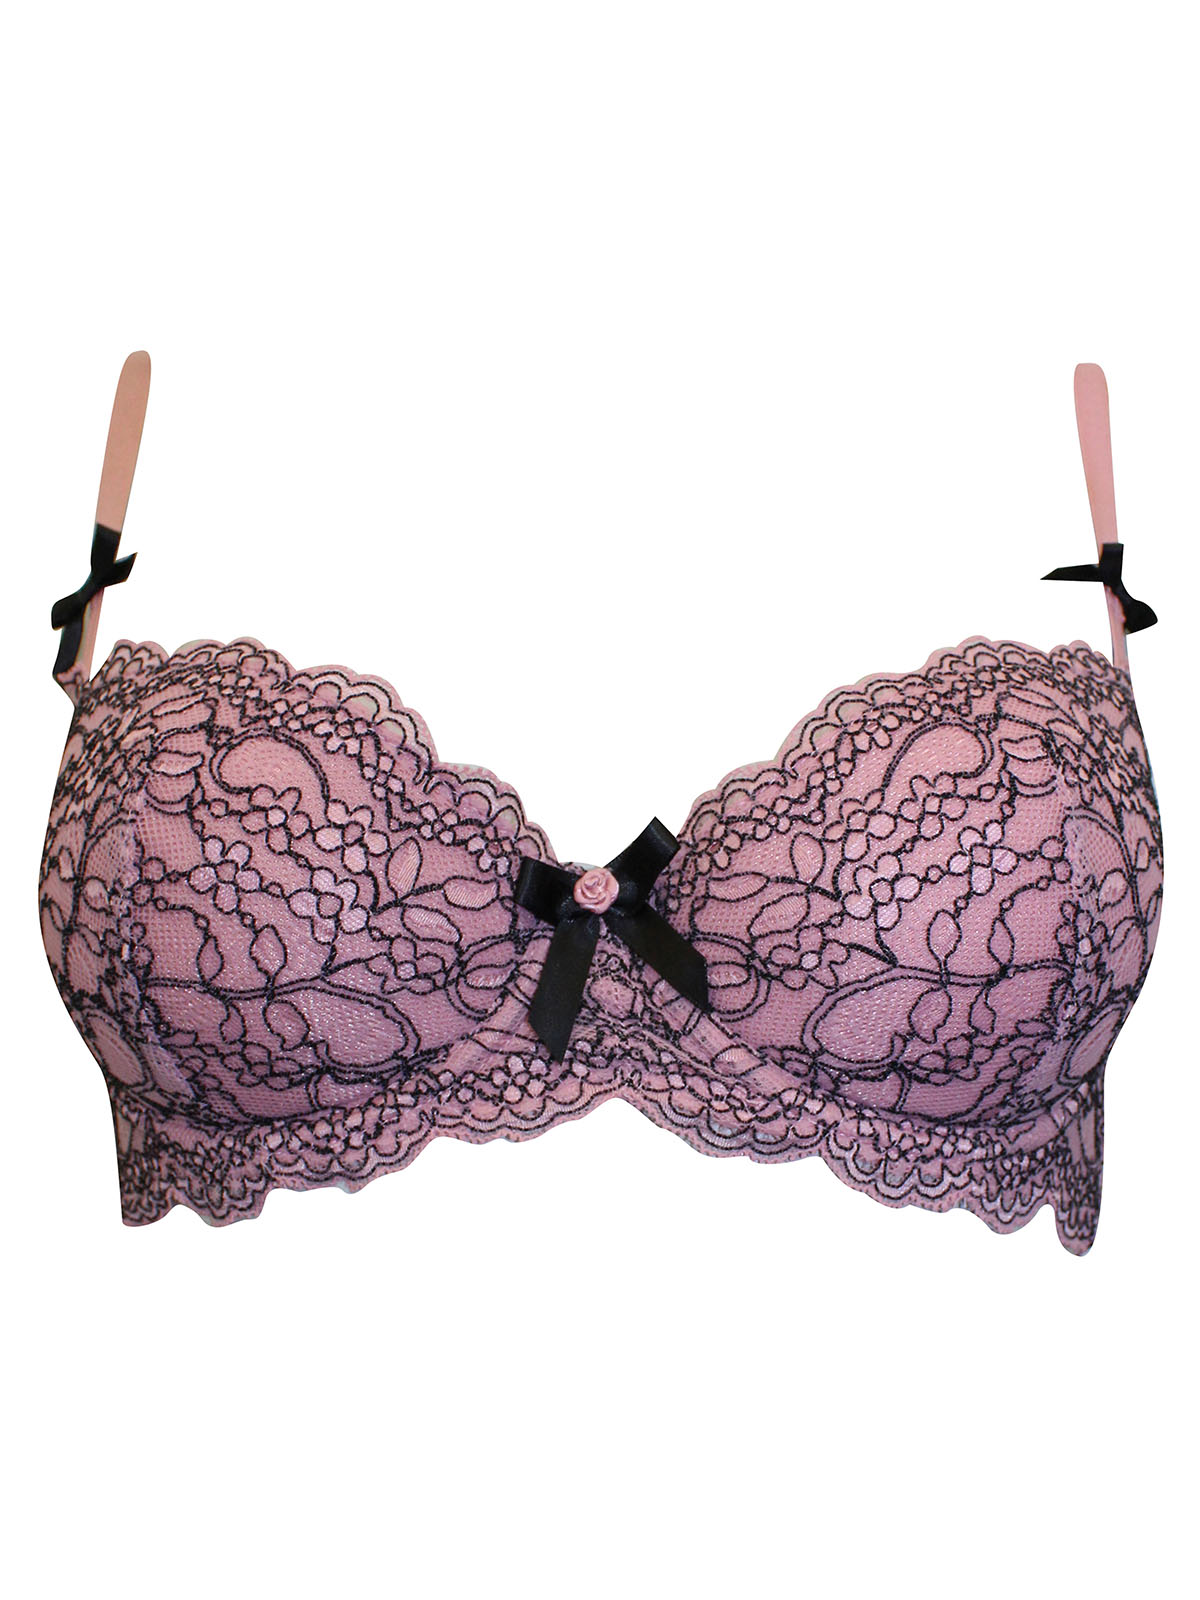 Buy Ann Summers Red Brooke Floral Lace Bra & Knickers Set from